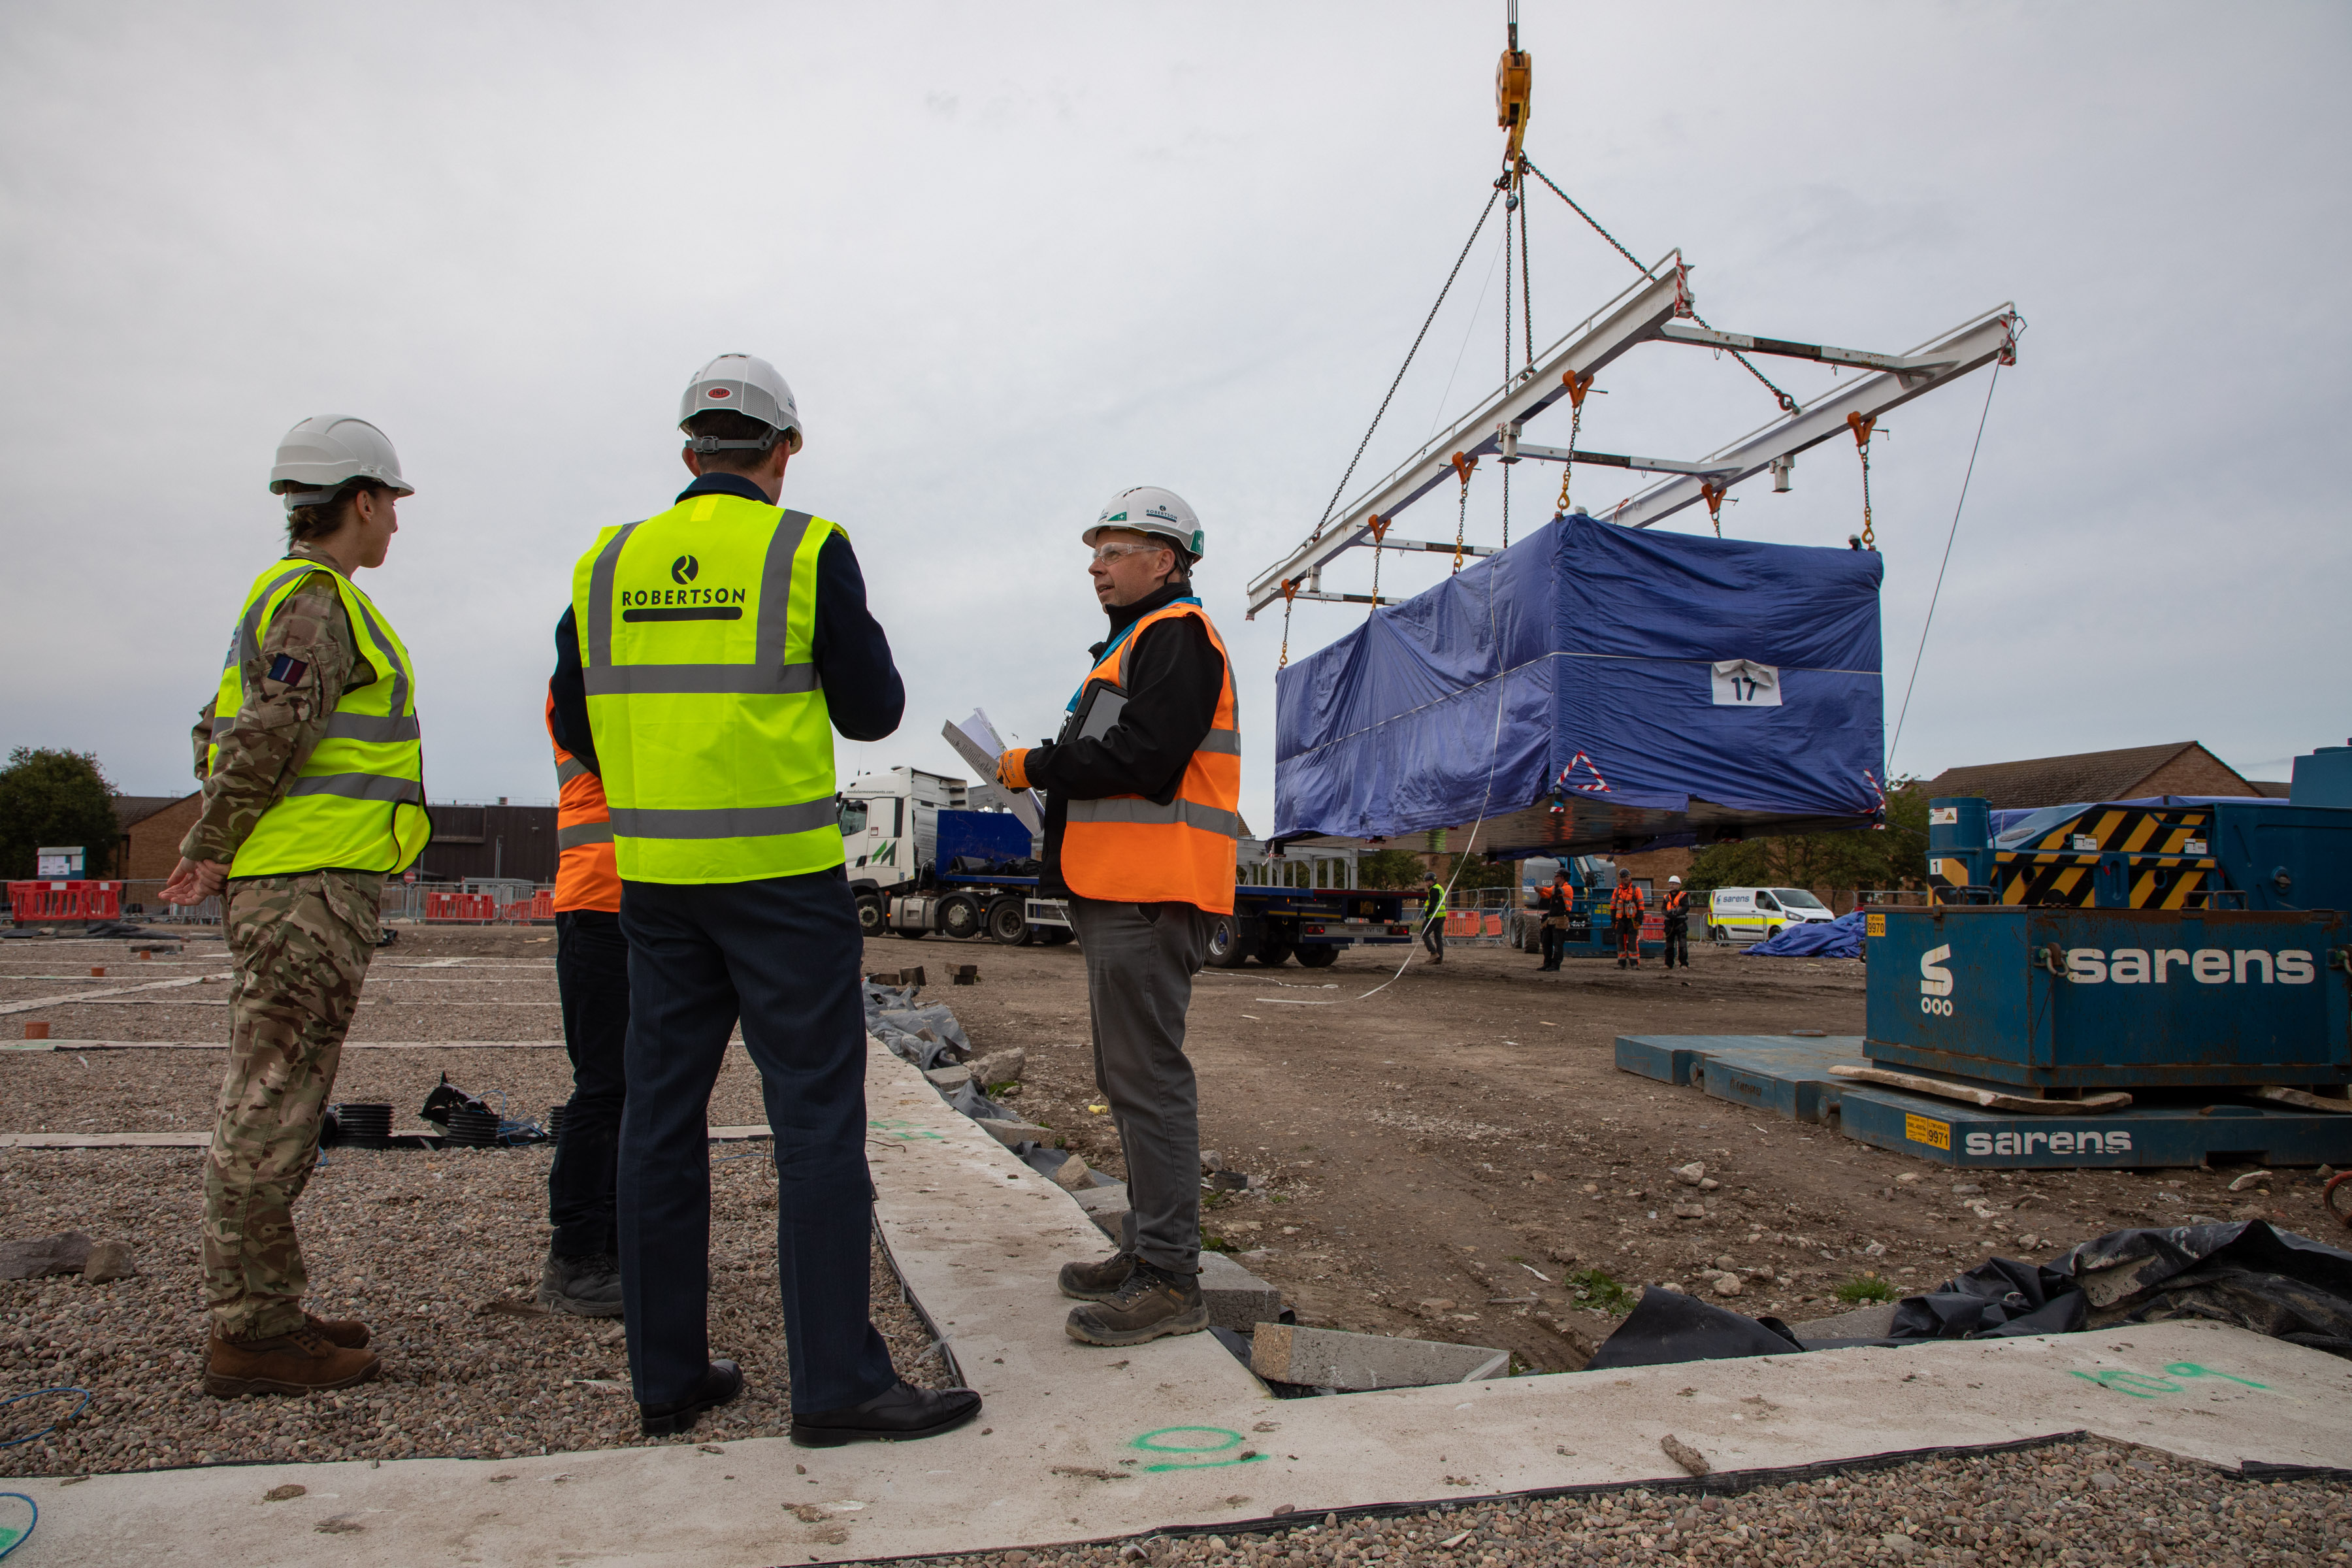 Image shows RAF aviators and civil servants on construction site with a crane lifting crates.